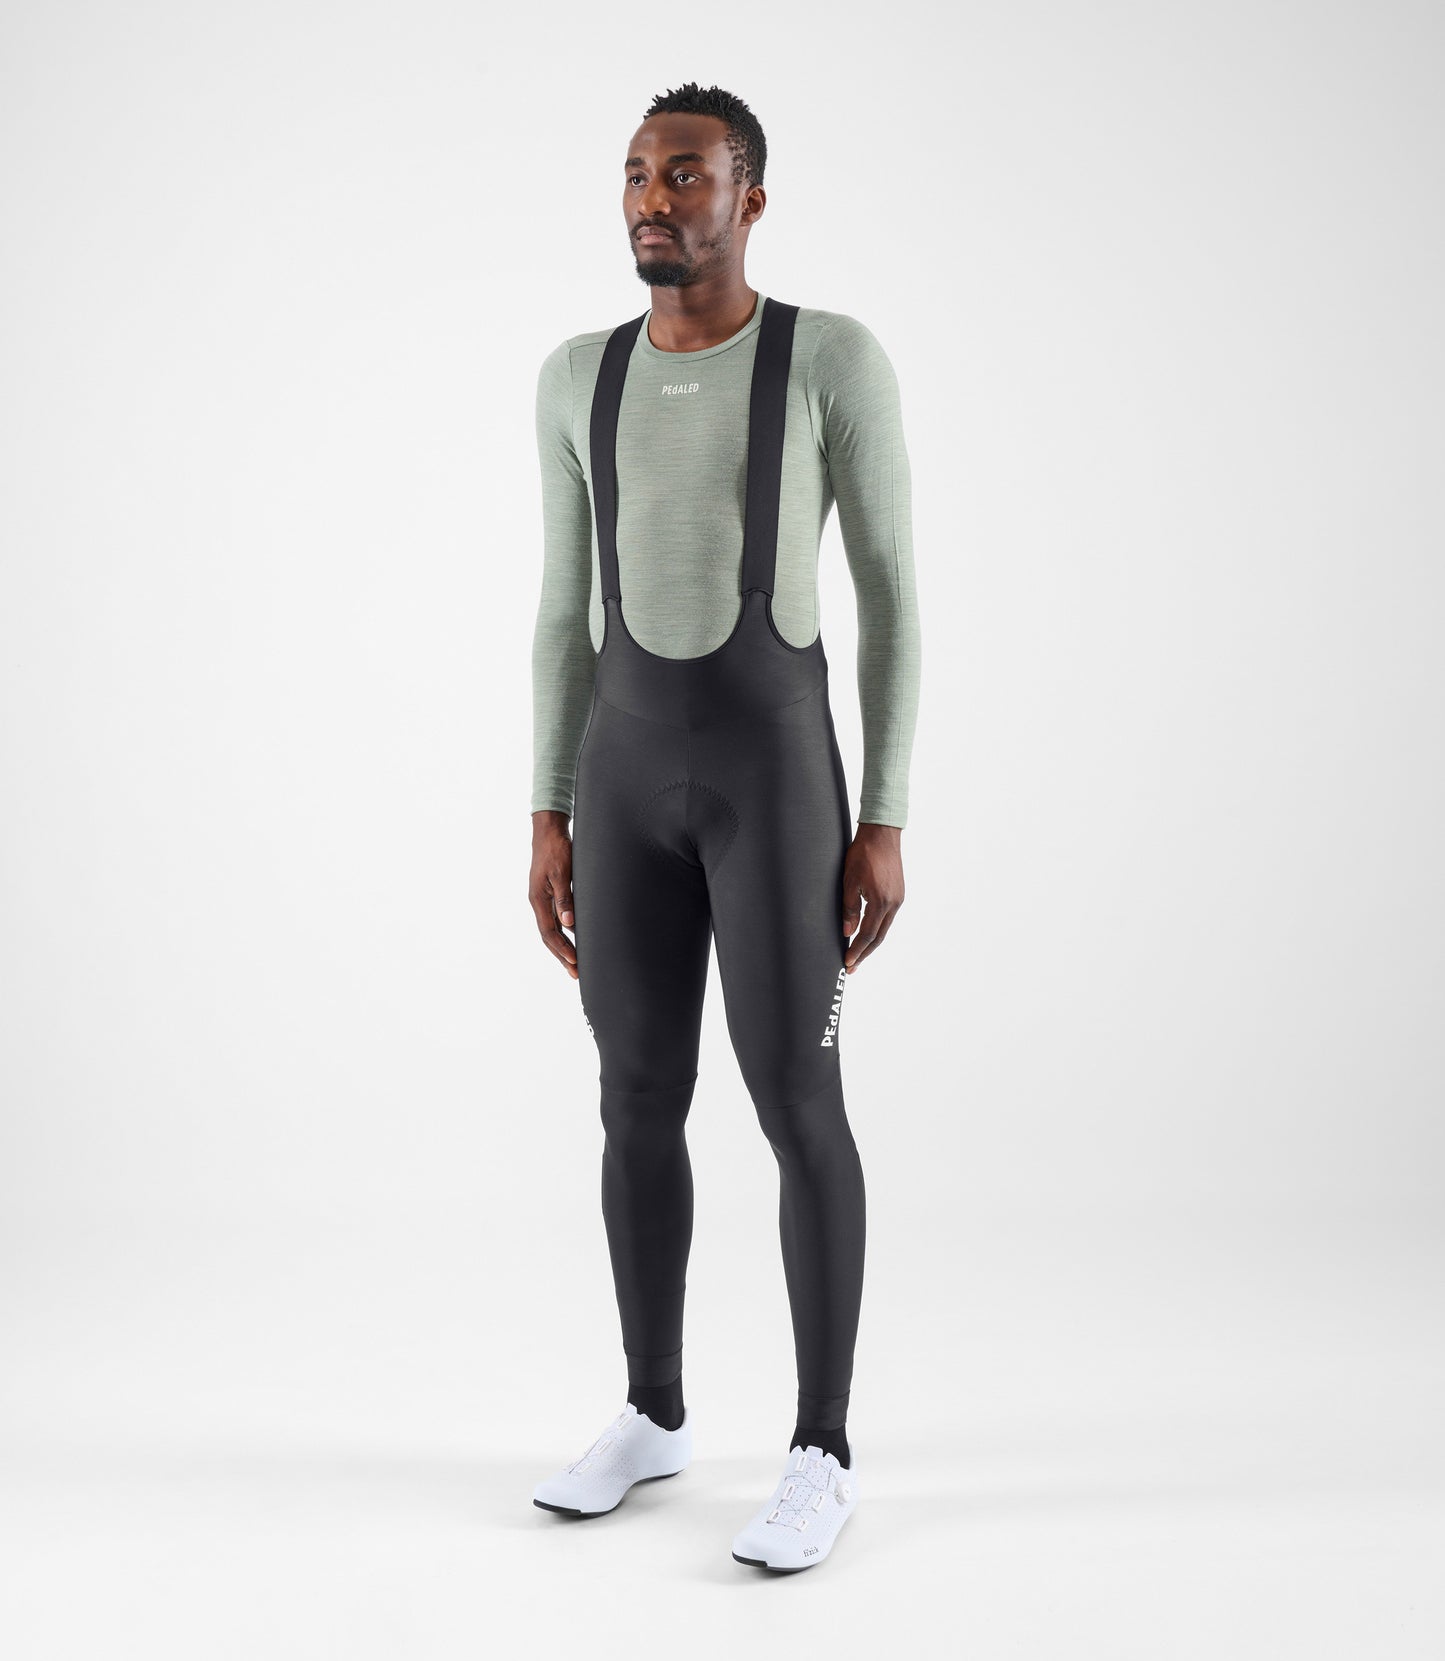 24WMBEL03PE_3_men cycling base layer green element total body front pedaled